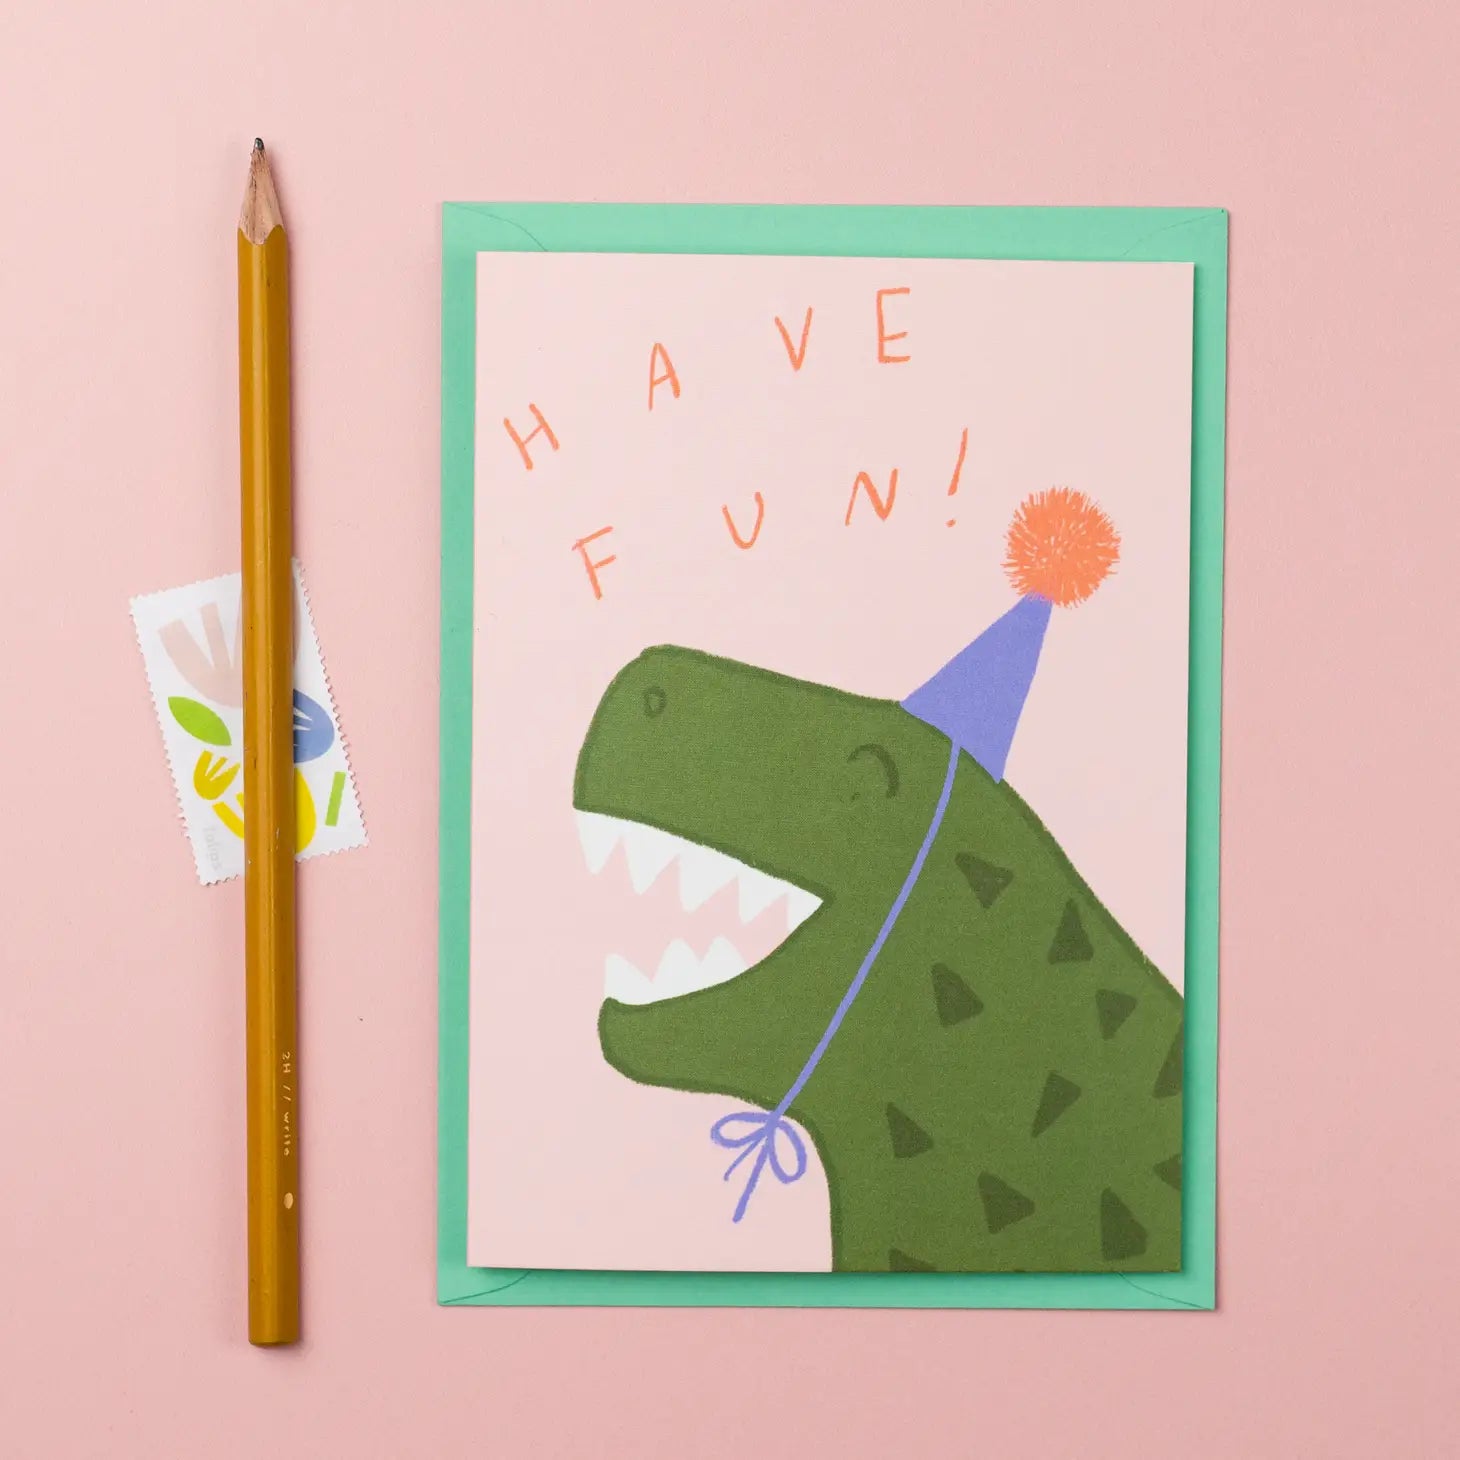 ‘Have Fun’ - Party T Rex Card - The Bristol Artisan Handmade Sustainable Gifts and Homewares.